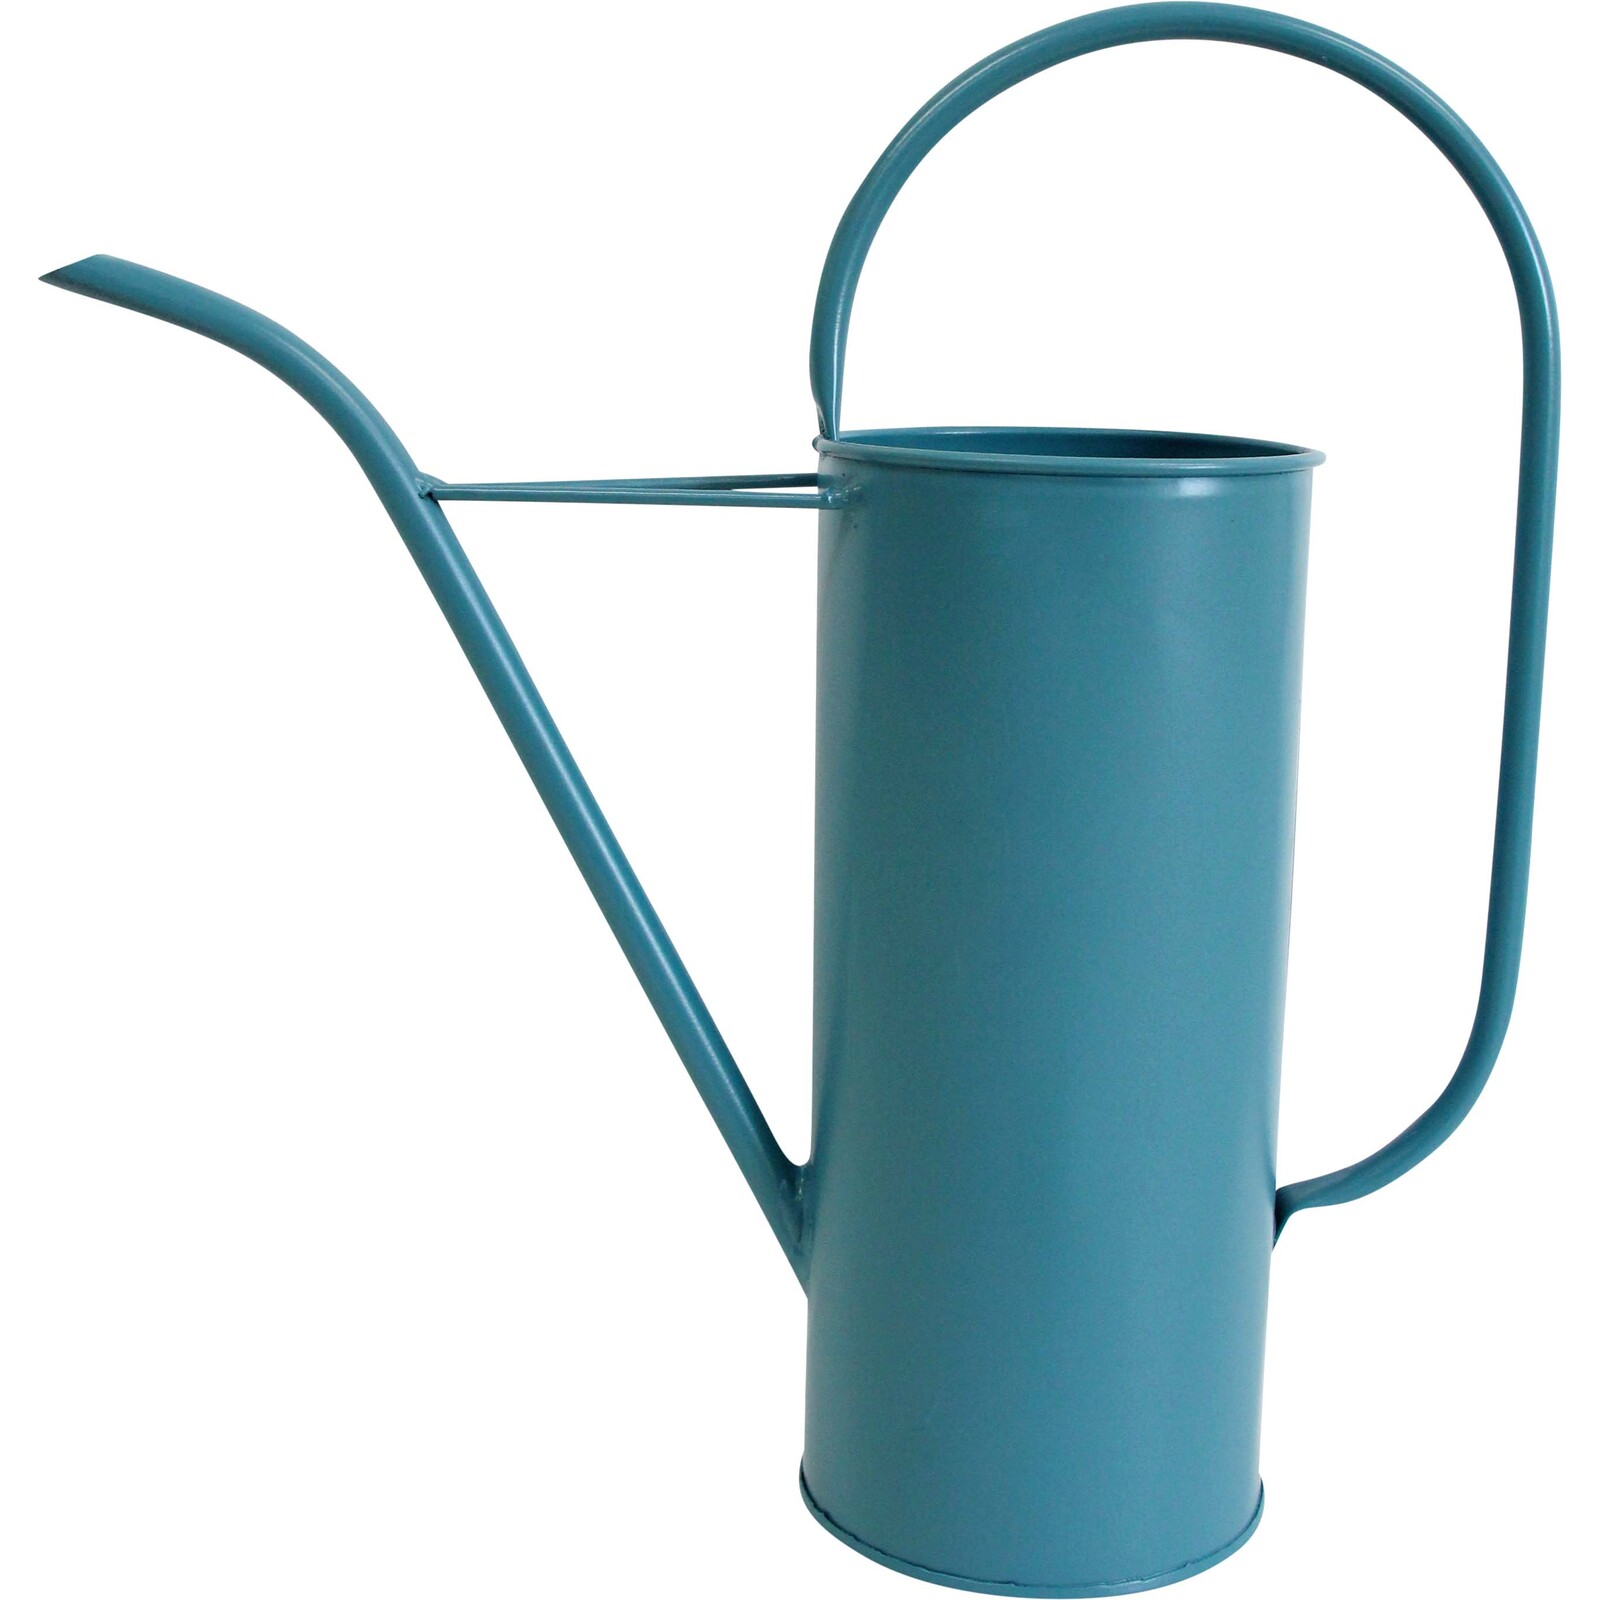 Decorative Watering Can Tall Sky